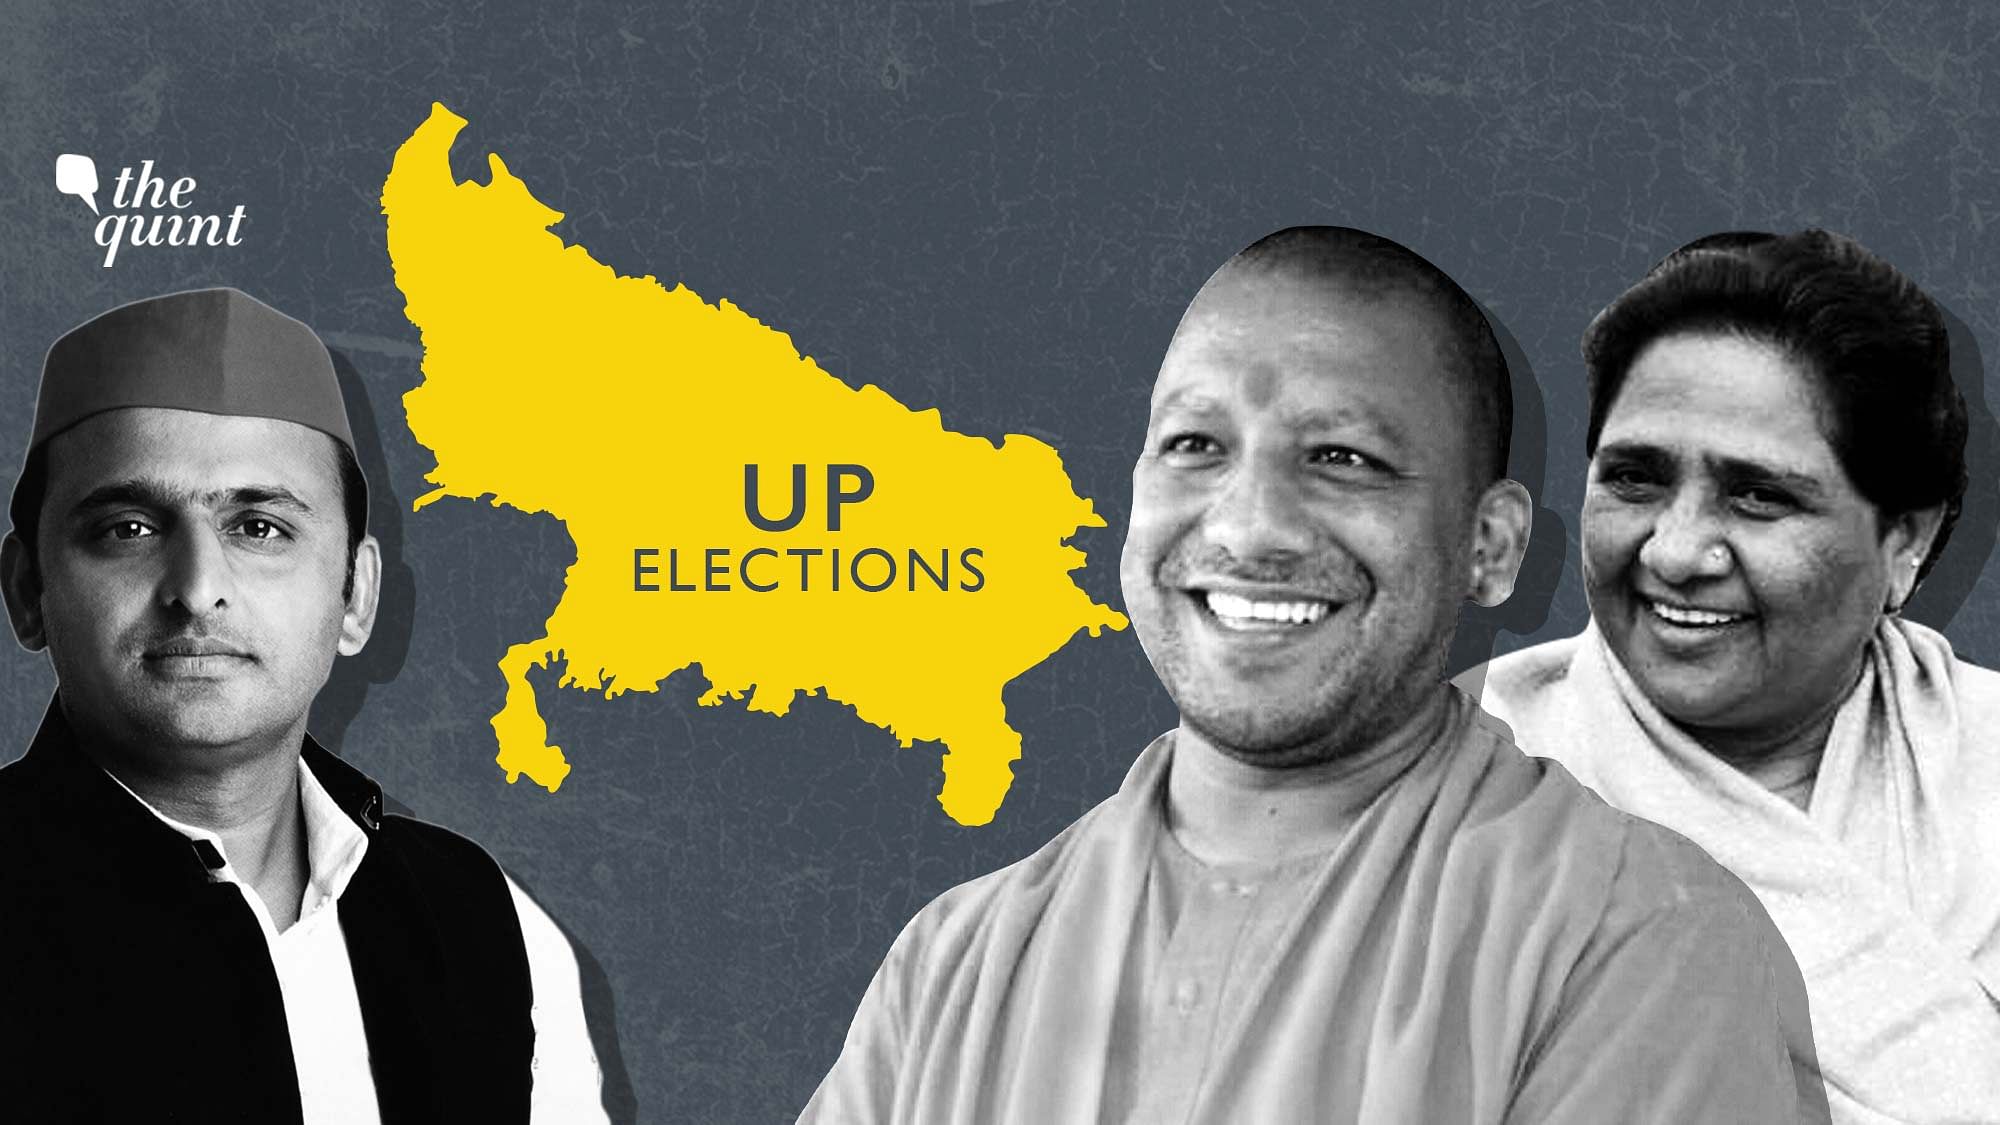 Photos of Mayawati, Akhilesh Yadav and UP Chief Minister Yogi Adityanath used for representation. A number of factors indicate that the BJP will not be entering the 2022 polls as an aggressor.&nbsp;